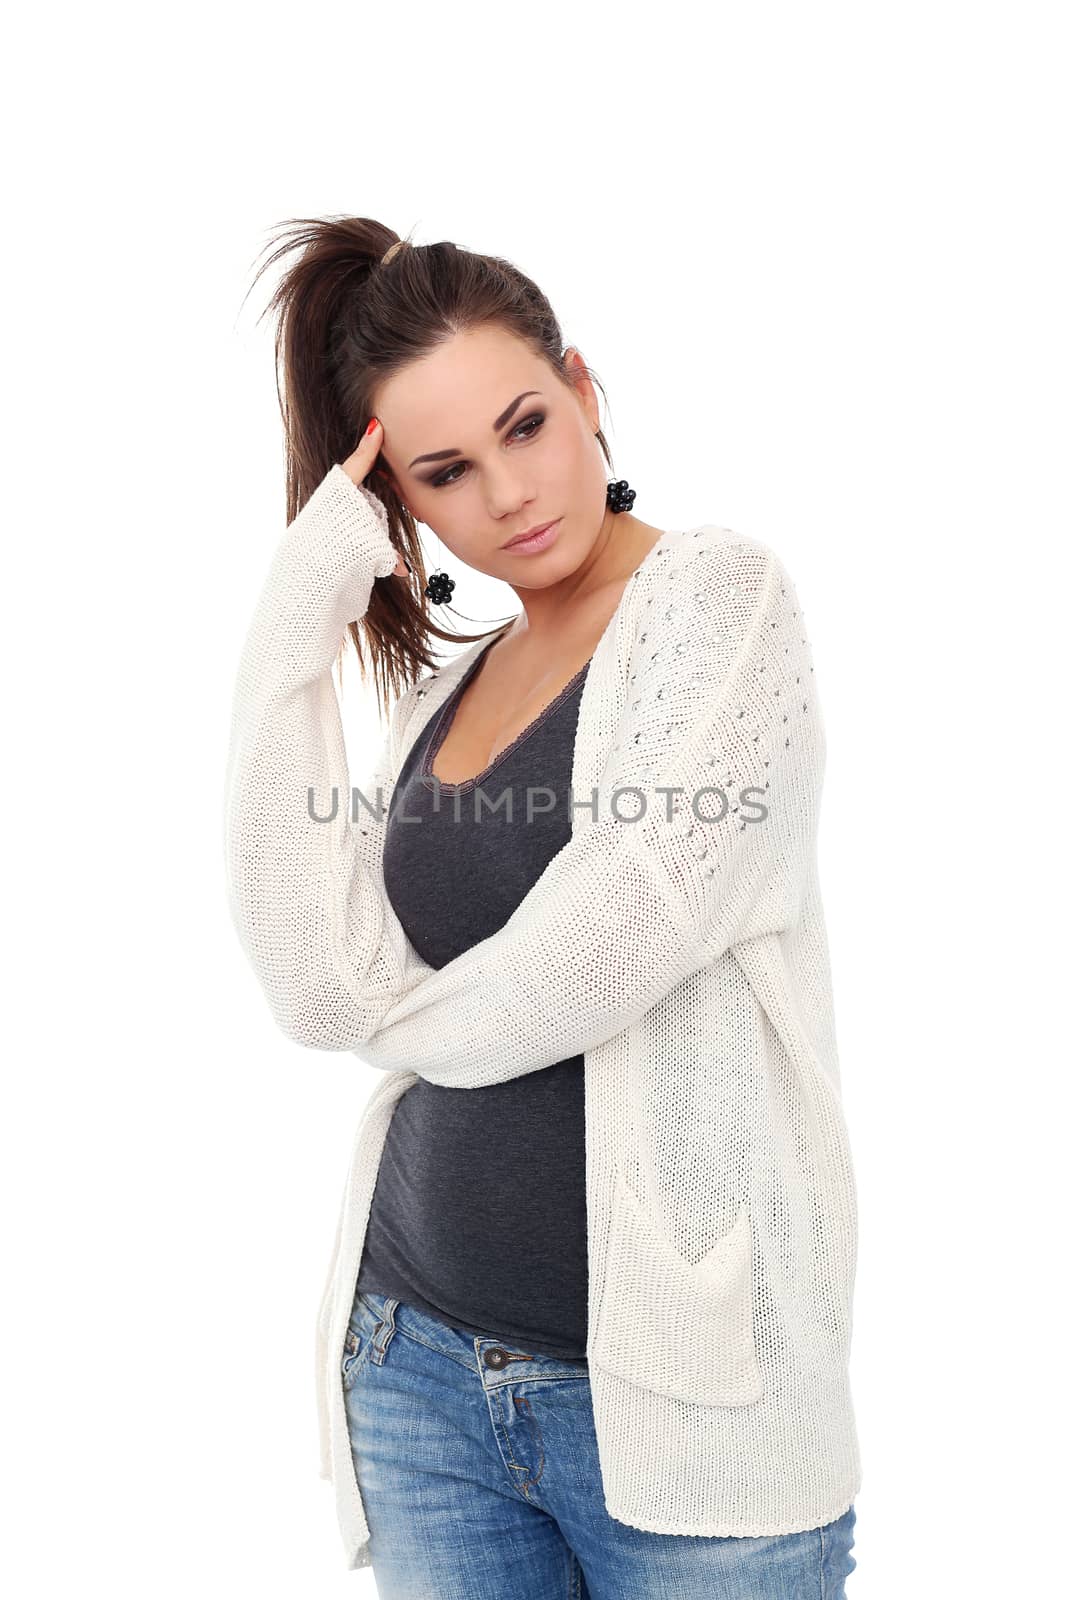 Portrait of a beautiful girl with brown hair who is posing in long white blouse over a white background